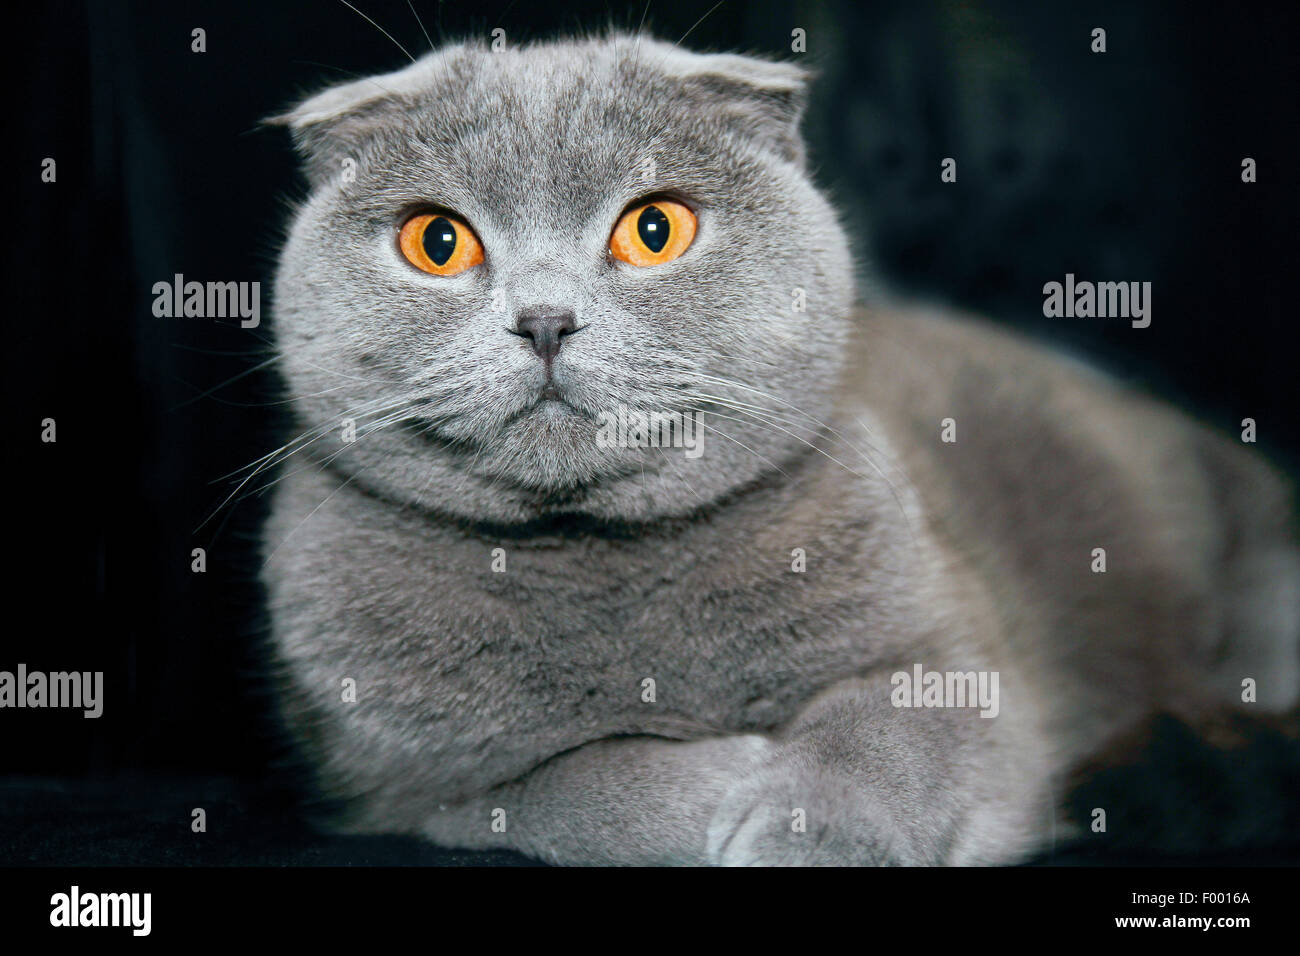 British Shorthair (Felis silvestris f. catus), grey-haired cat with floppy ears in front of black background Stock Photo